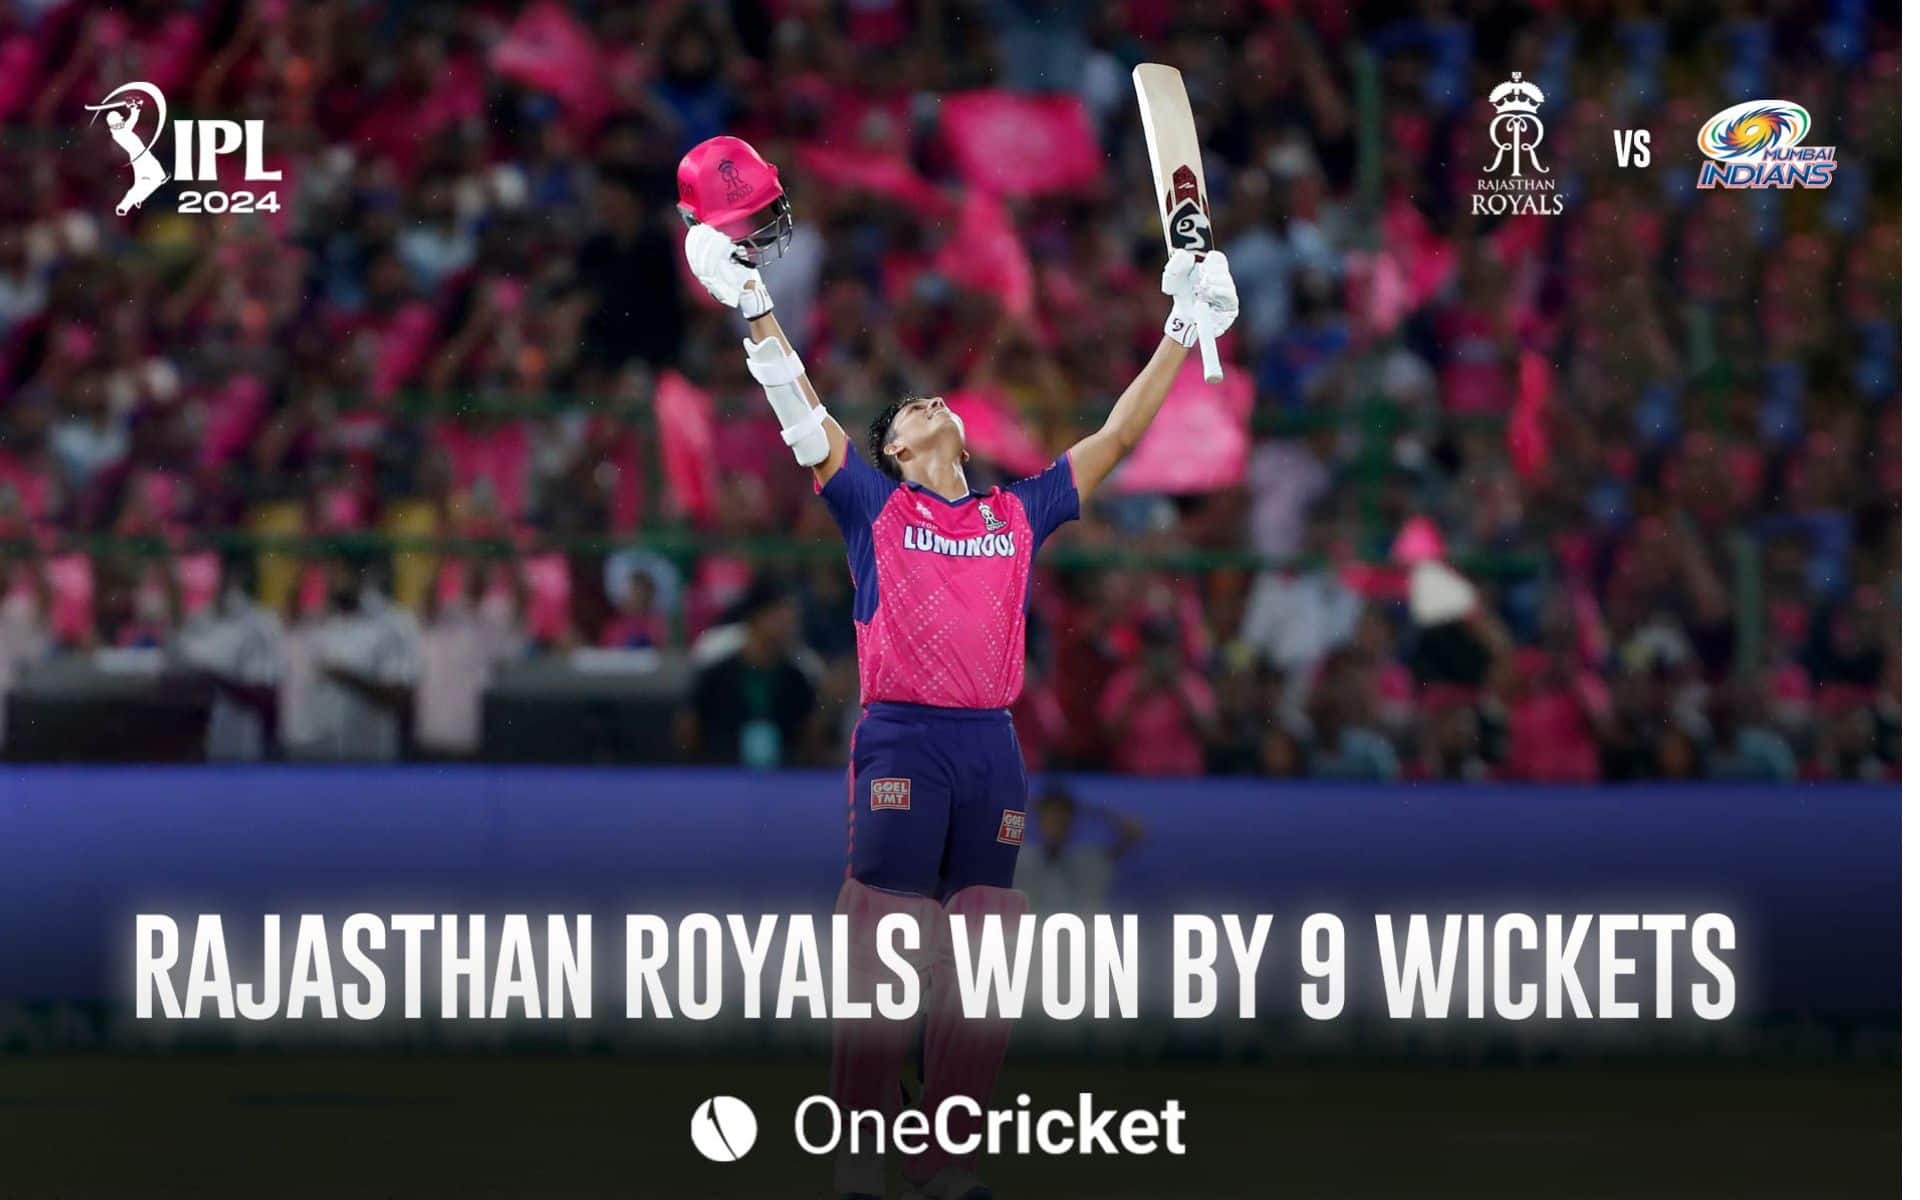 RR win by 9 wickets (OneCricket)